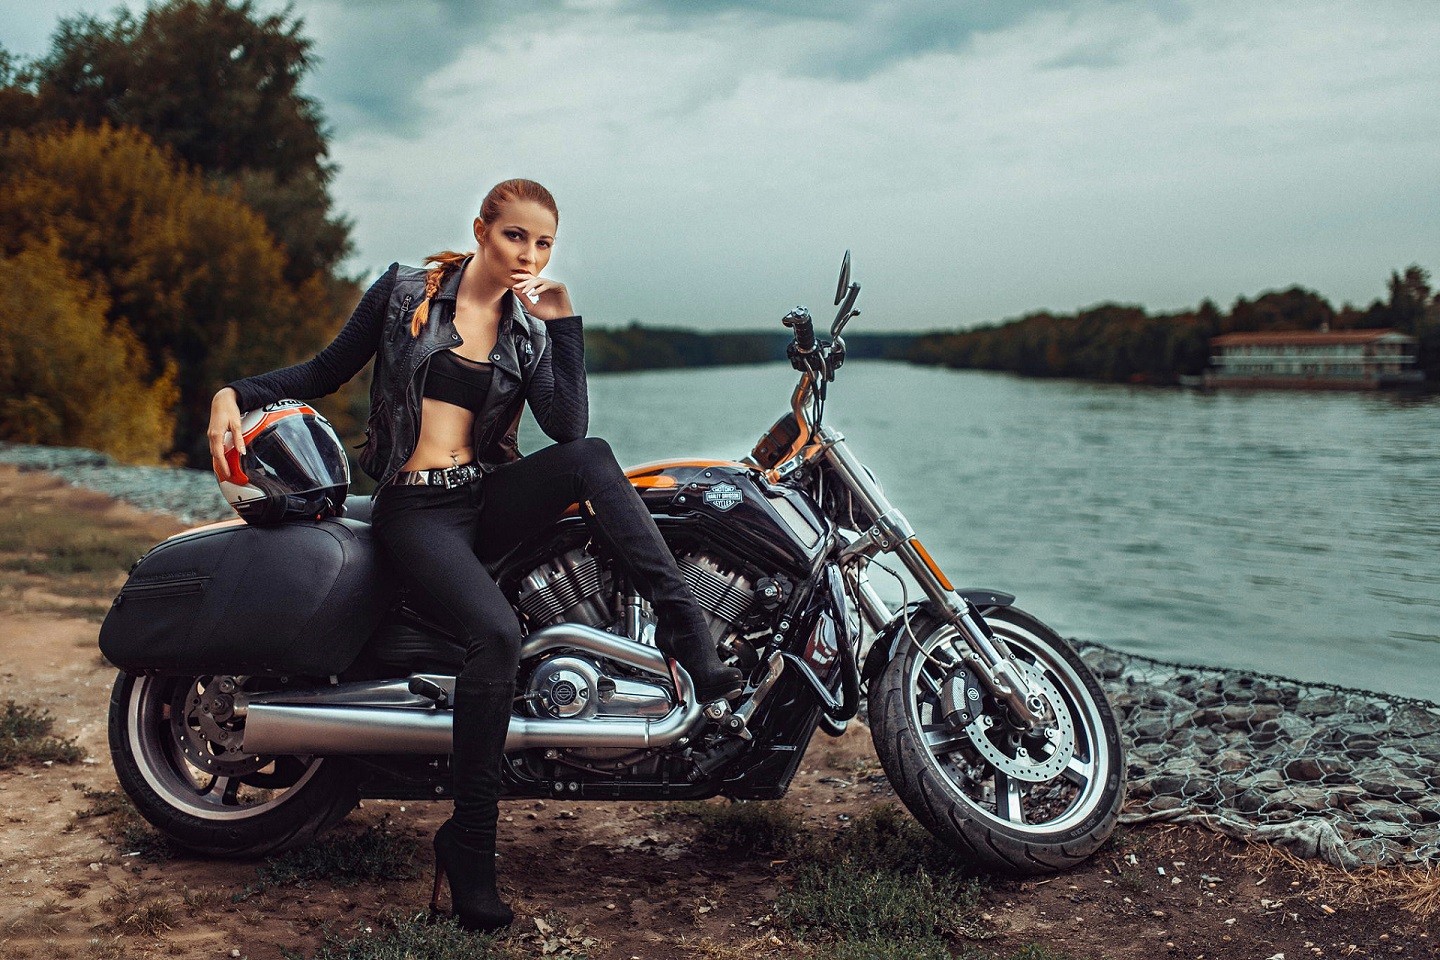 People 1440x960 chopper women with motorcycles river vehicle motorcycle helmet nature women outdoors outdoors bare midriff looking at viewer black outfits Orange Motorcycles women Harley-Davidson American motorcycles